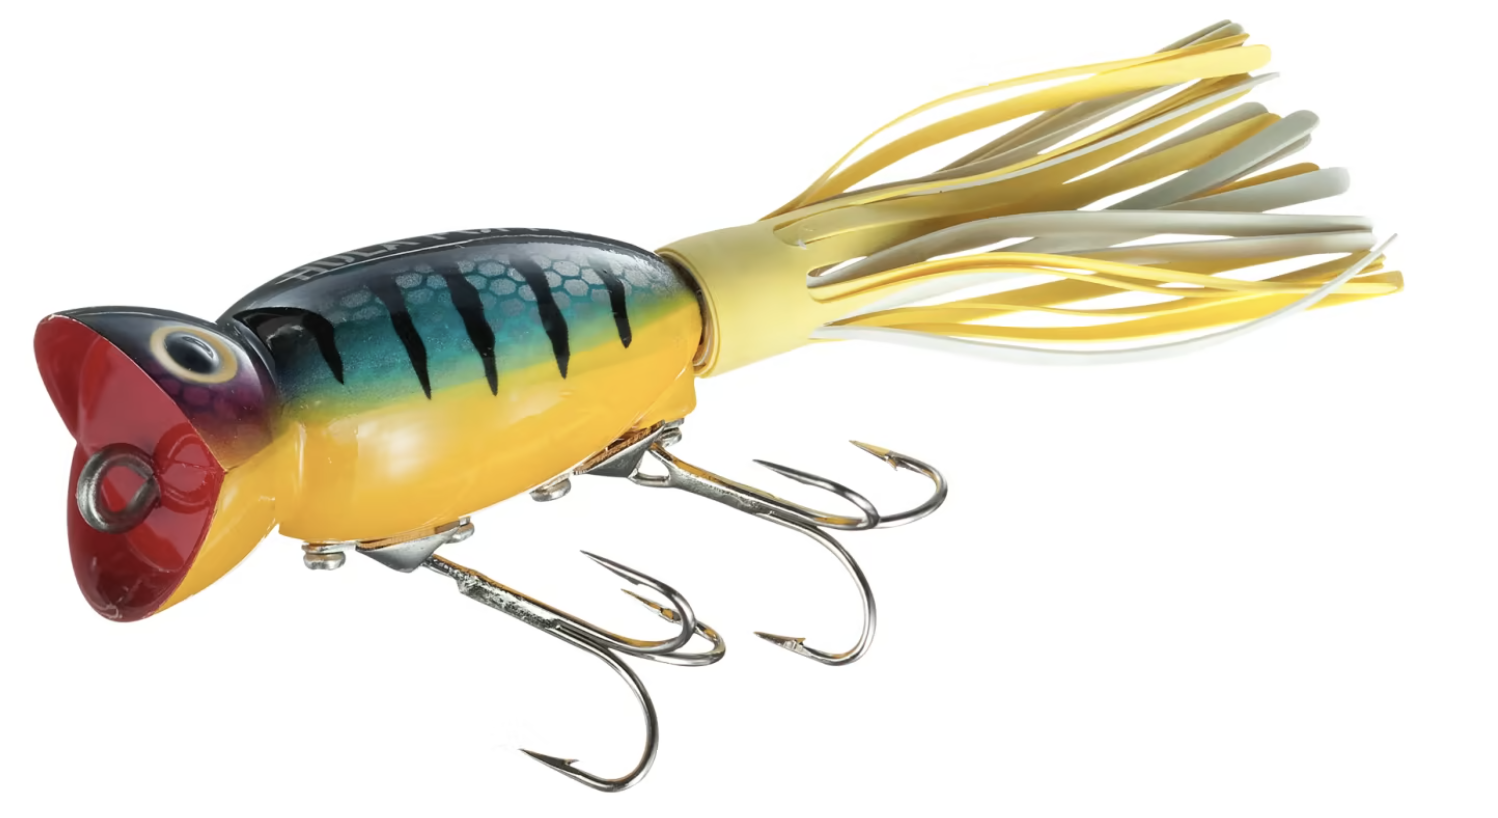 photo of popper lure for how to fish with poppers